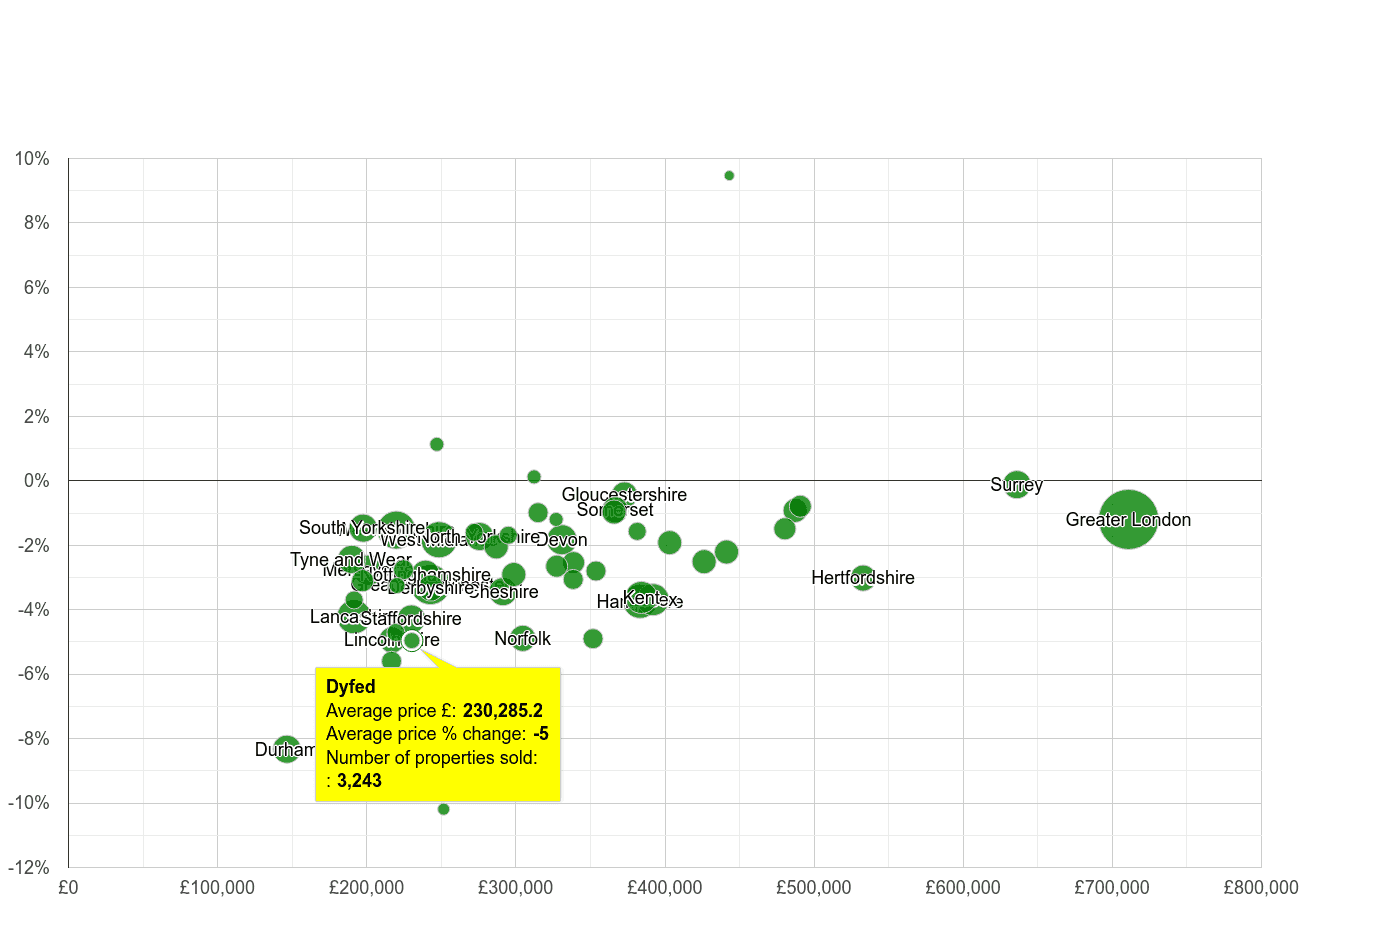 Dyfed house prices compared to other counties